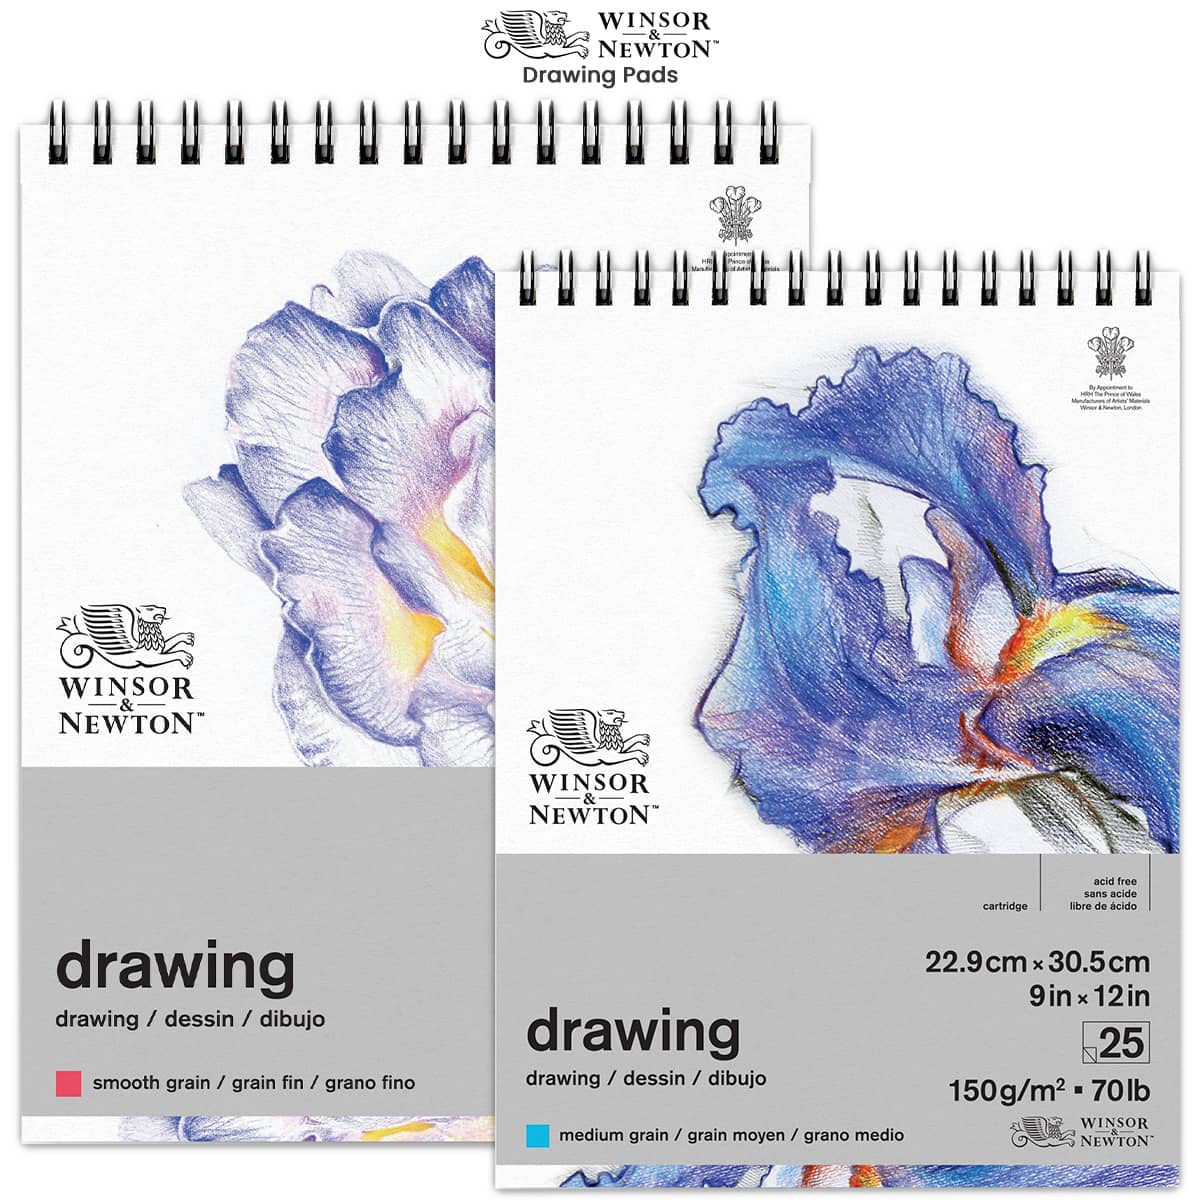 W&N Drawing Paper - Smooth Grain 220 GSM - A2 Pad 25 Sheets